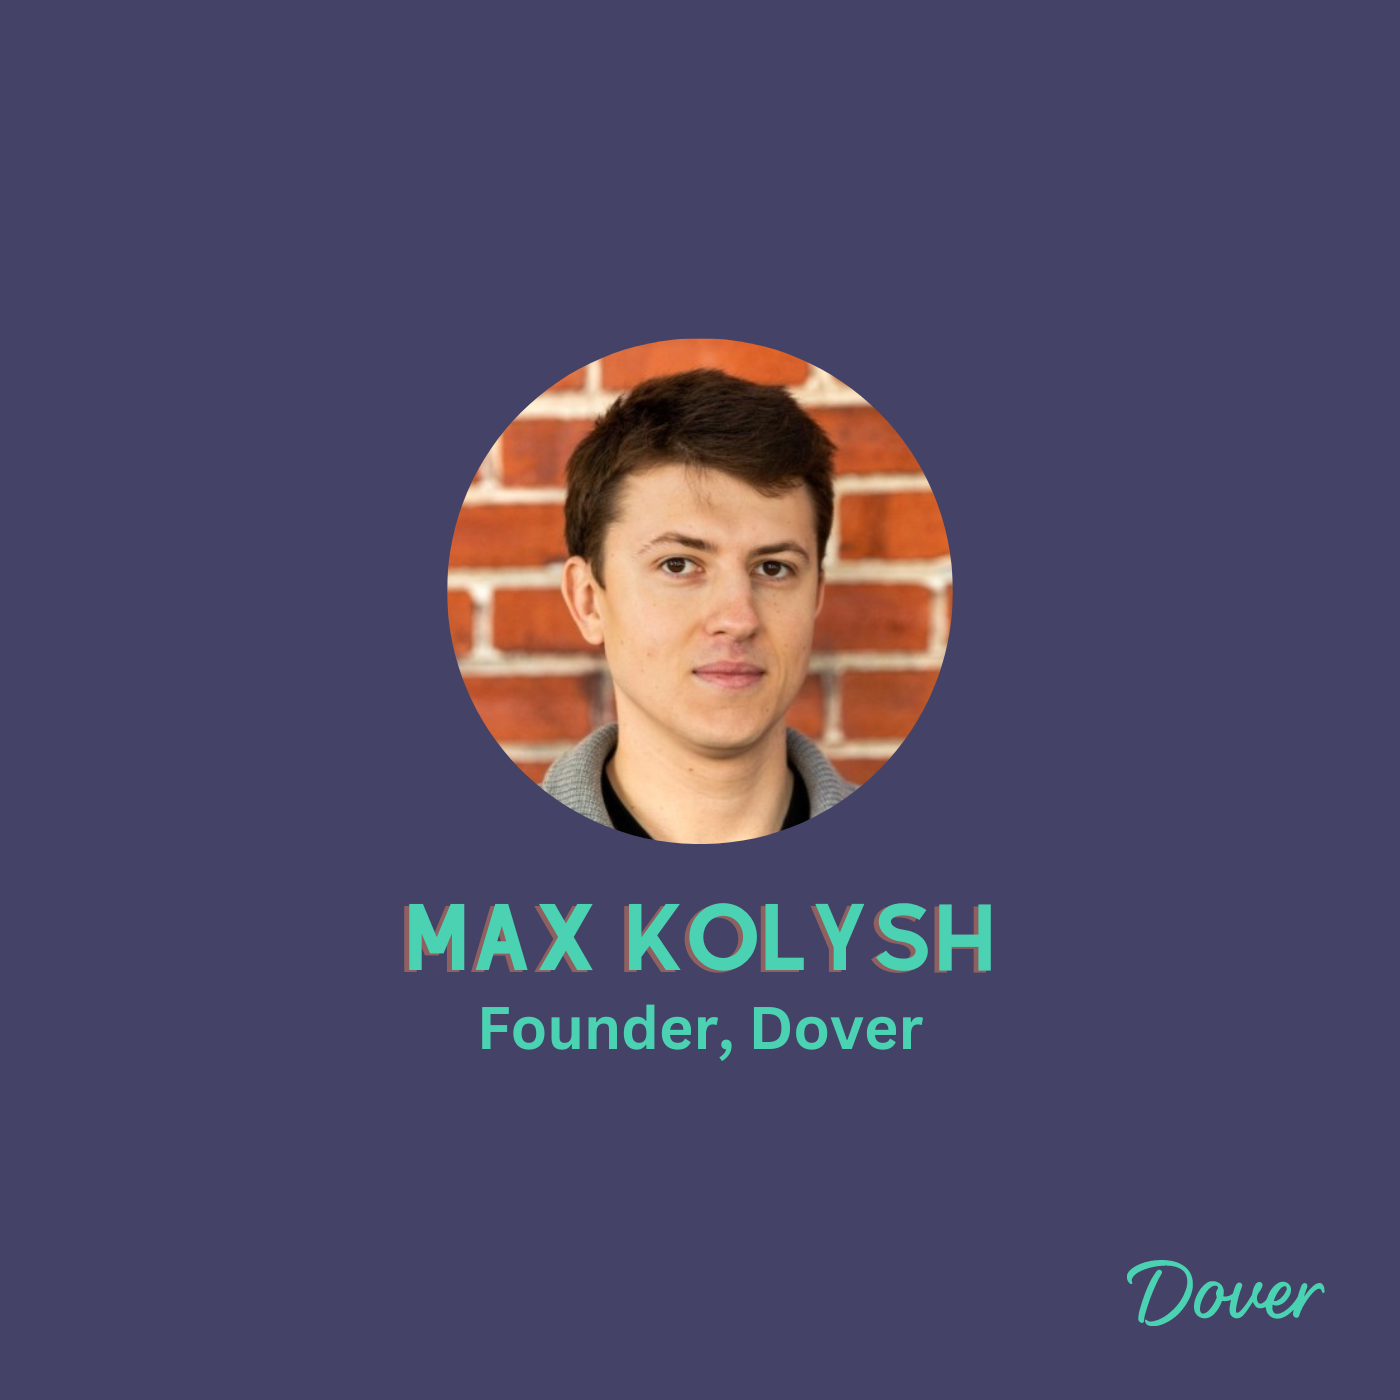 EPISODE #4: The founding team blueprint: insights on hiring, networking, and AI from Dover's CEO, Max Kolysh